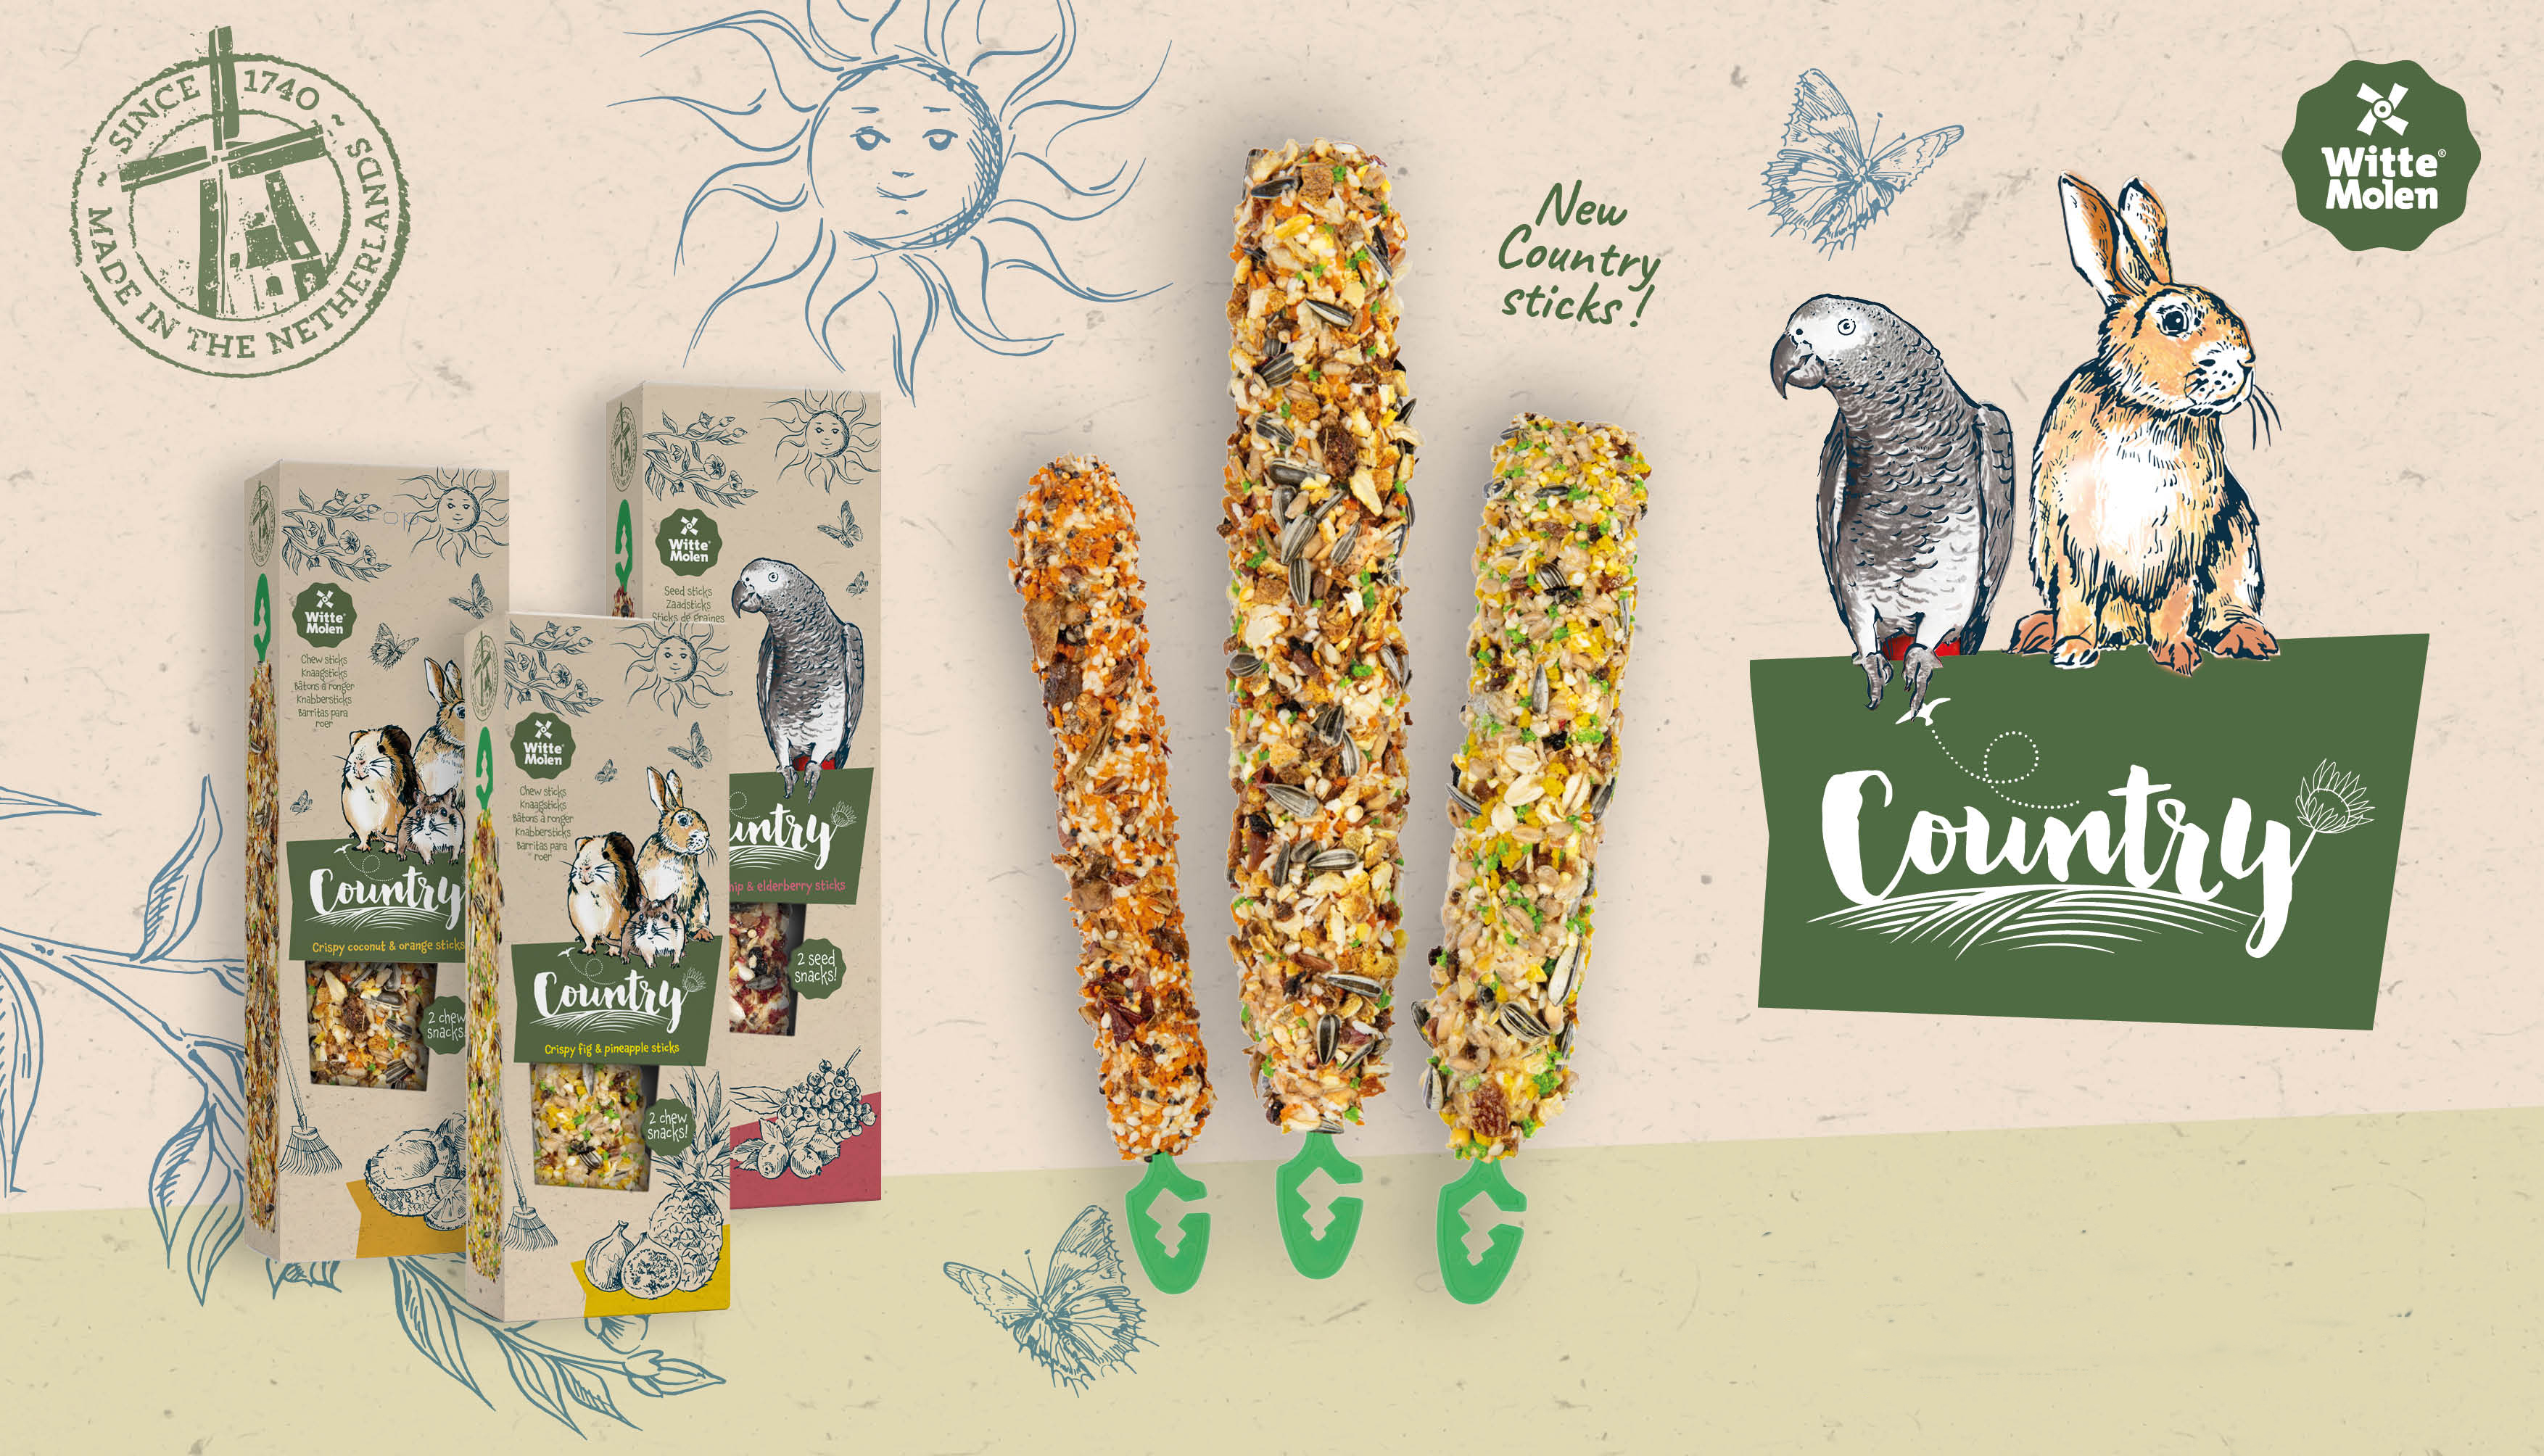 Delicious and healthy snacks for birds and mammals